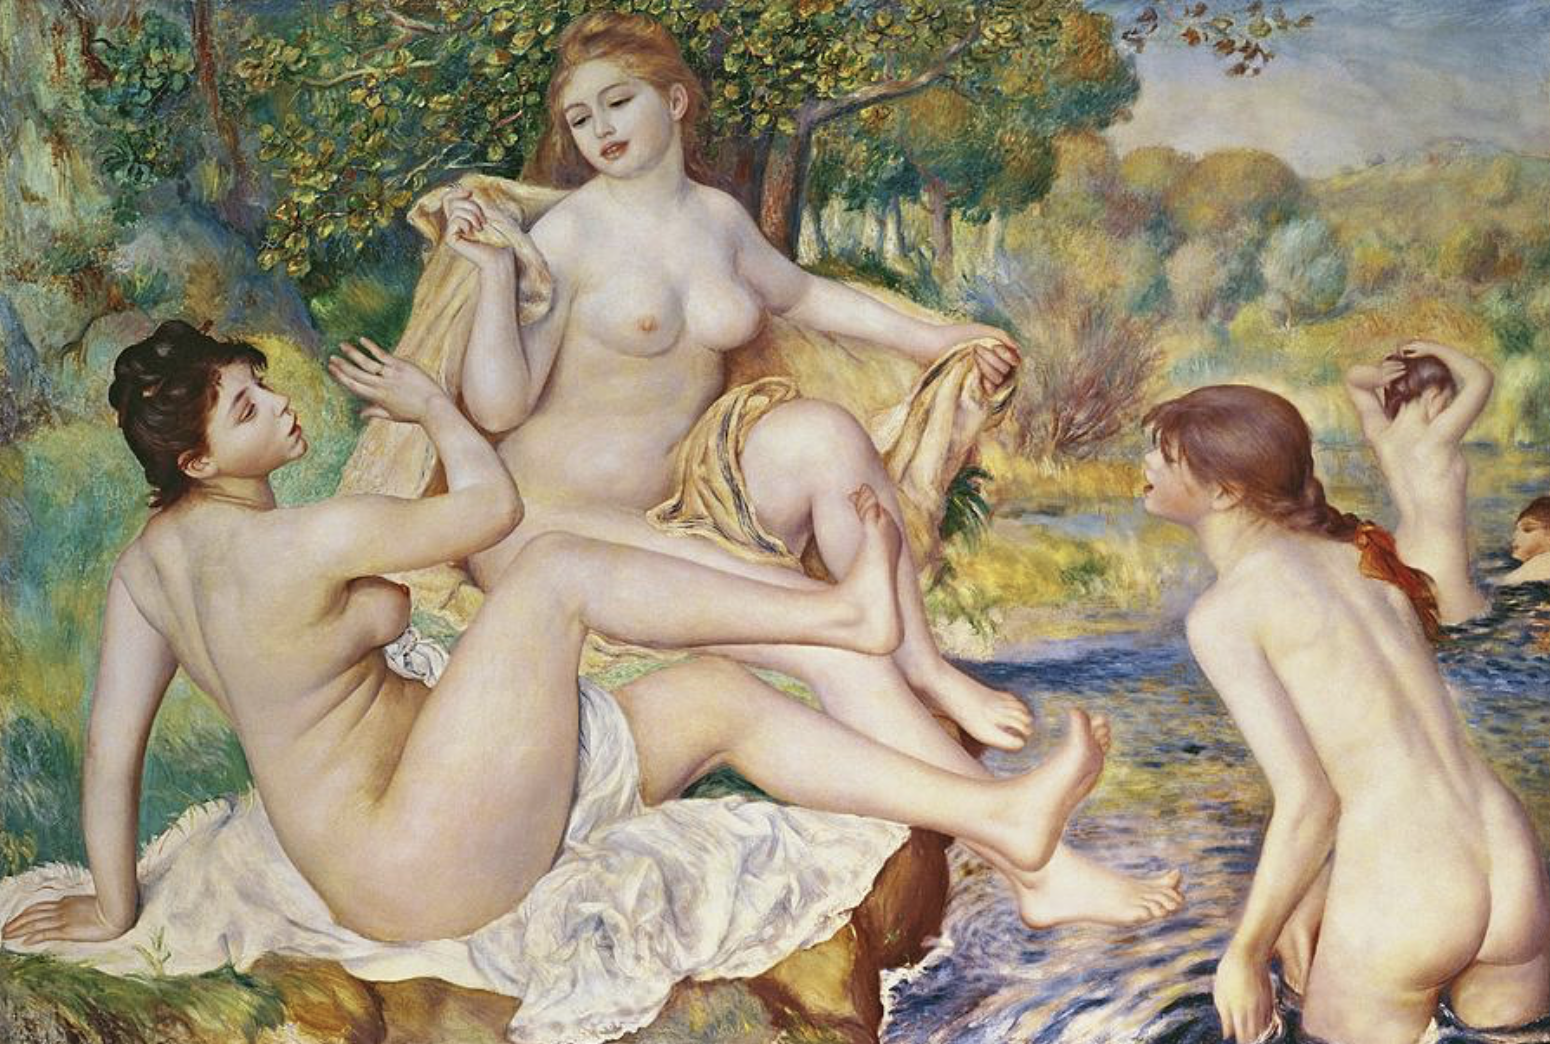 The Bathers, by Pierre Auguste Renoir, France 1887 oil on canvas